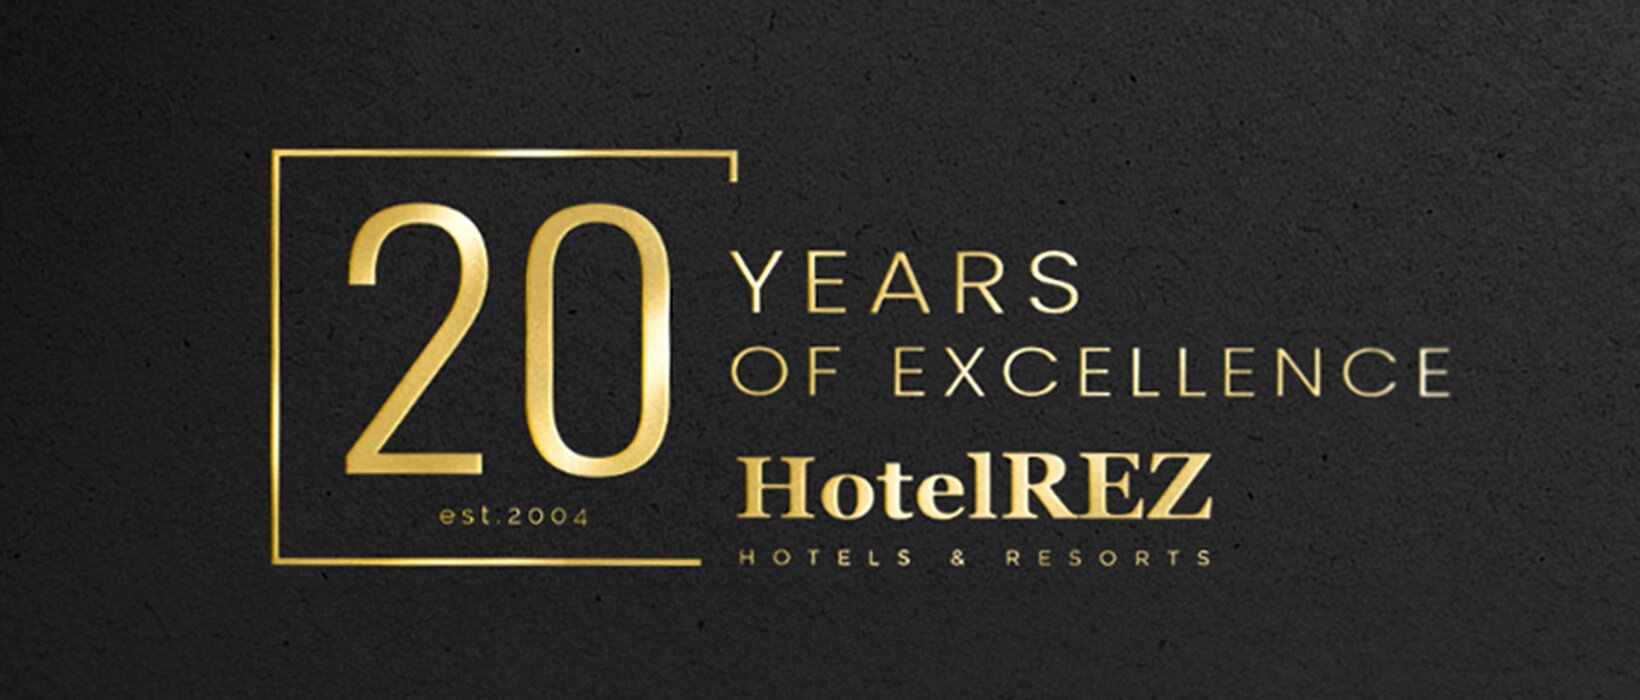 HotelREZ marks 20-year anniversary with new study of hotel booking channel trends